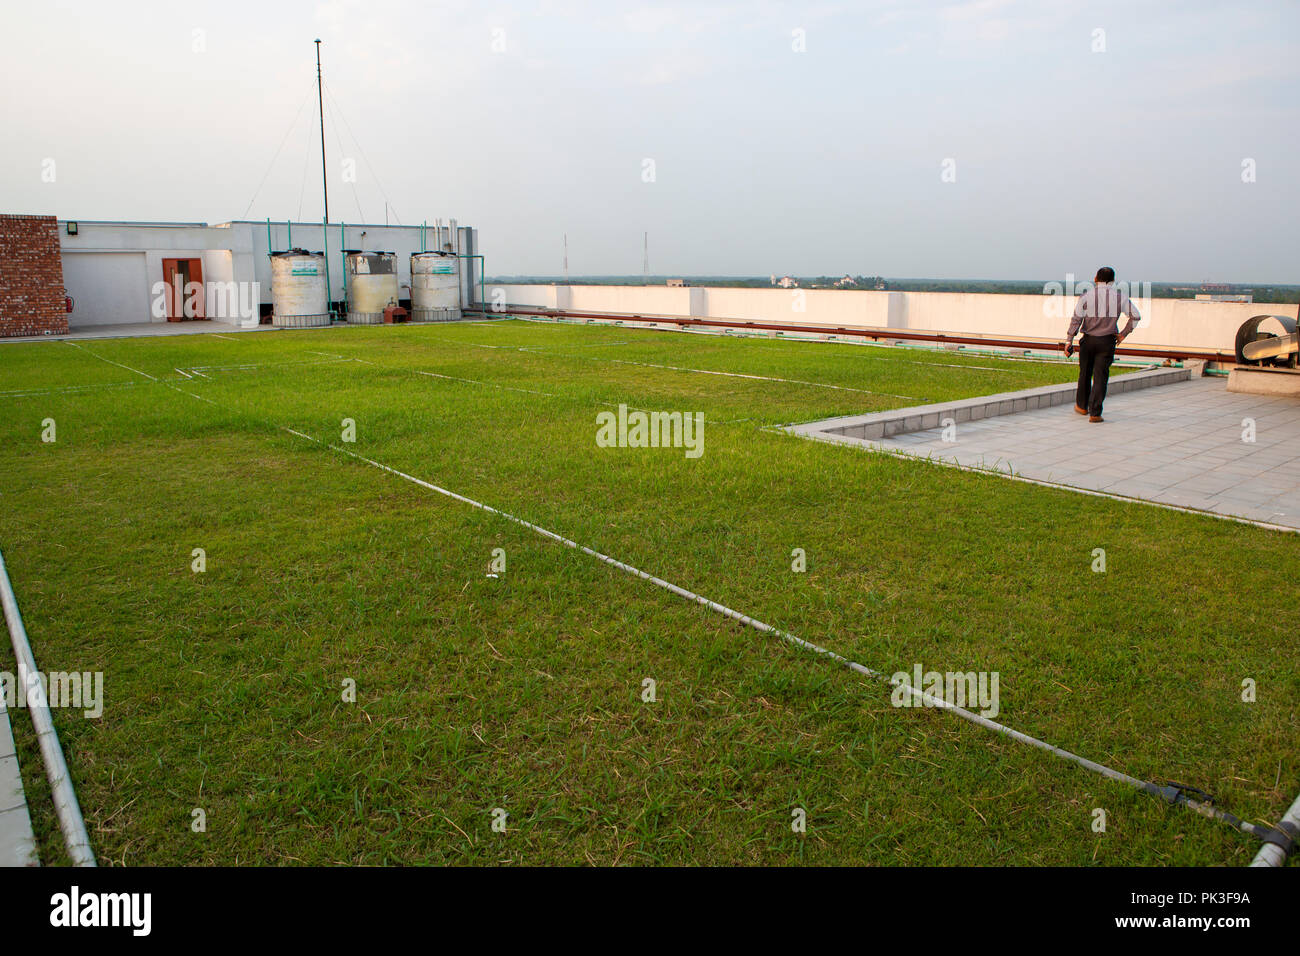 Grass growing on the roof of a garment factory in Bangladesh. Stock Photo